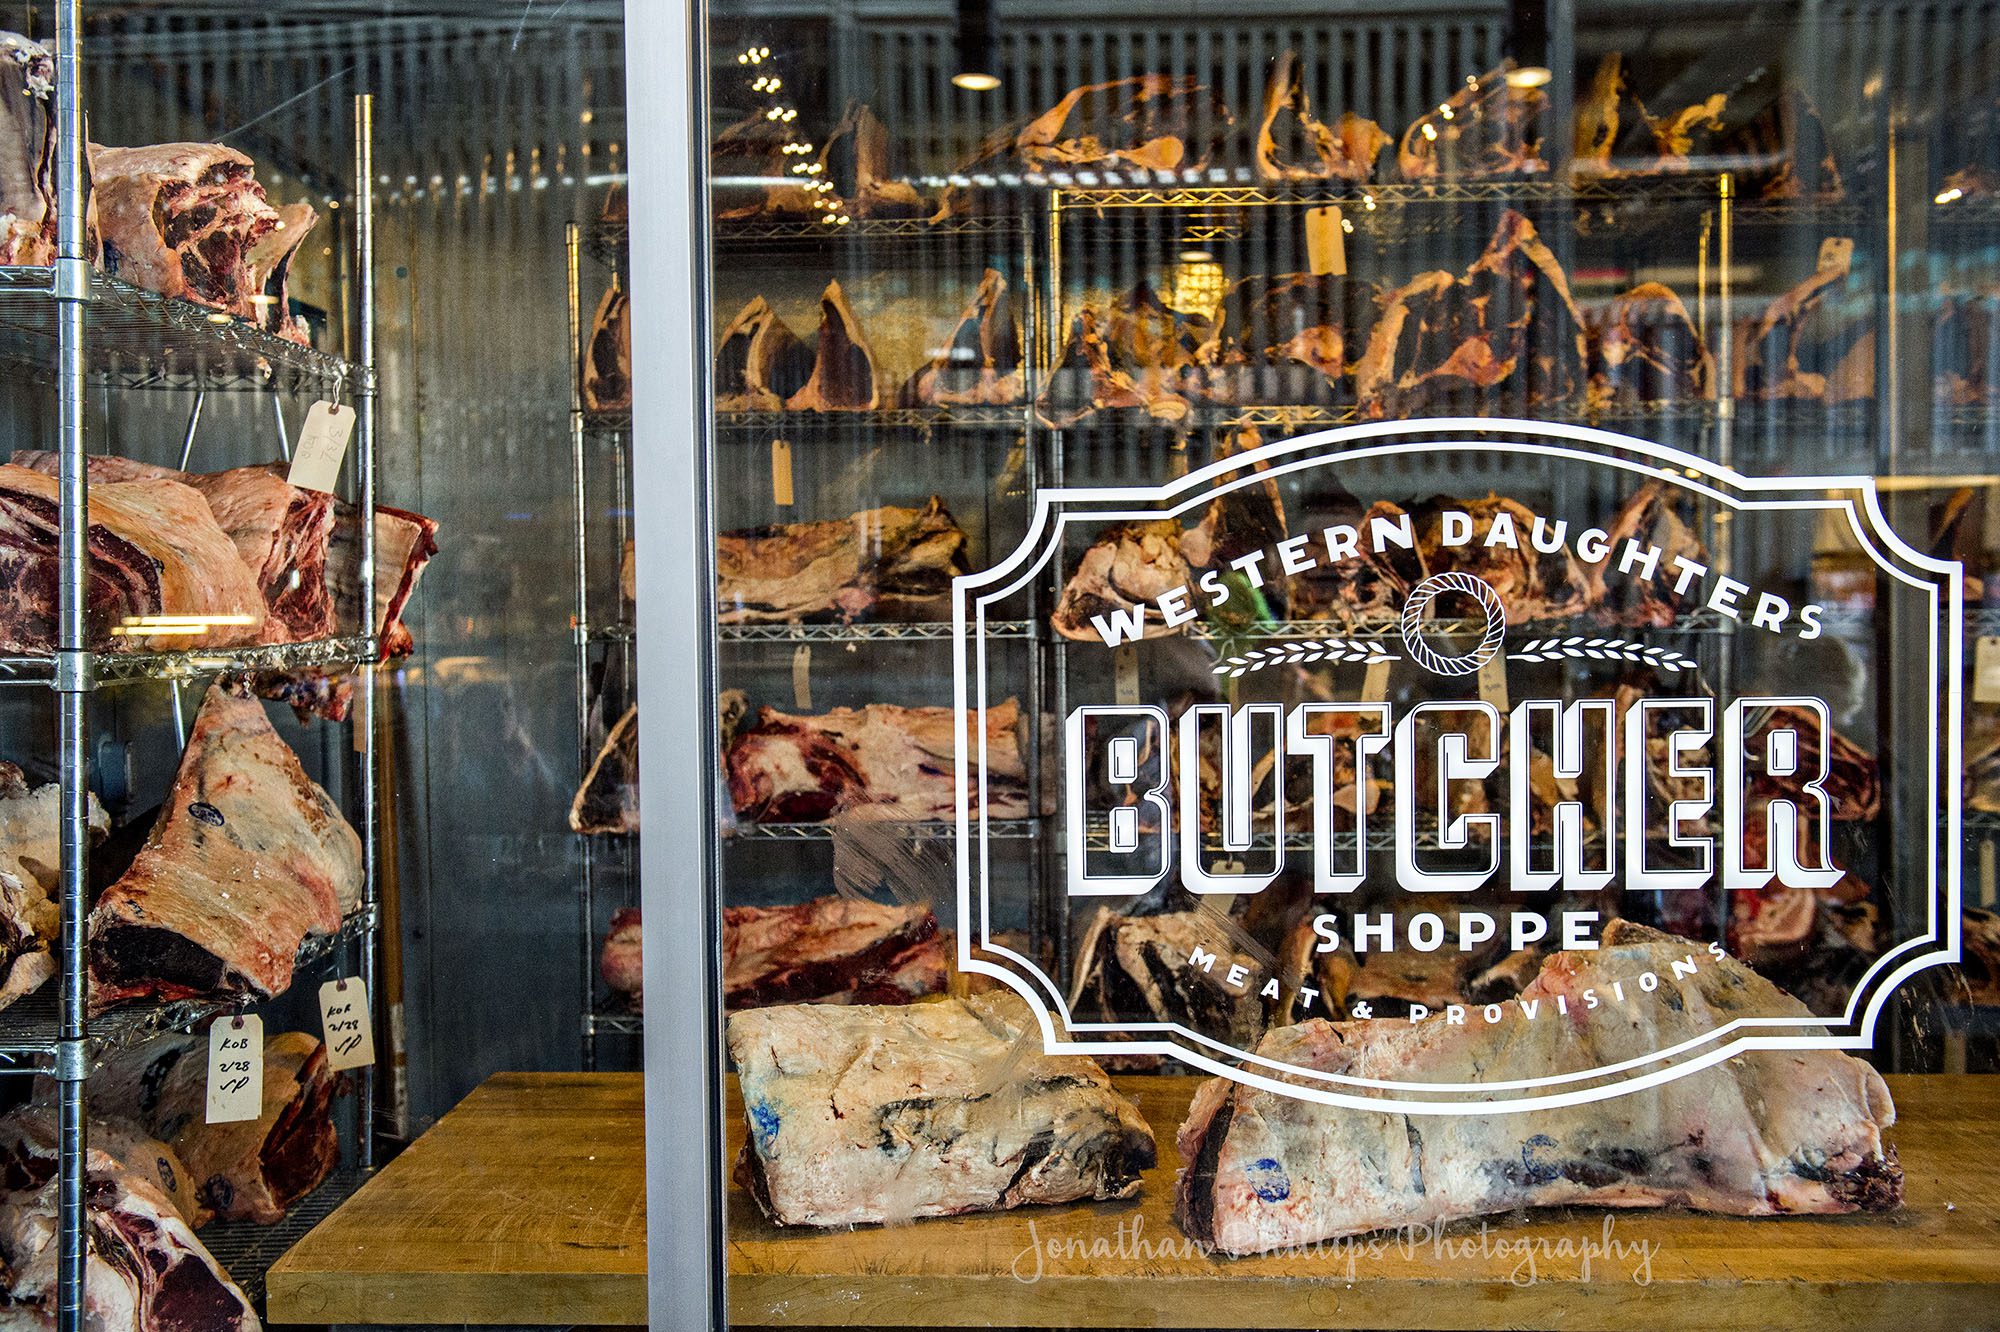 Western Daughters Butcher Shoppe.